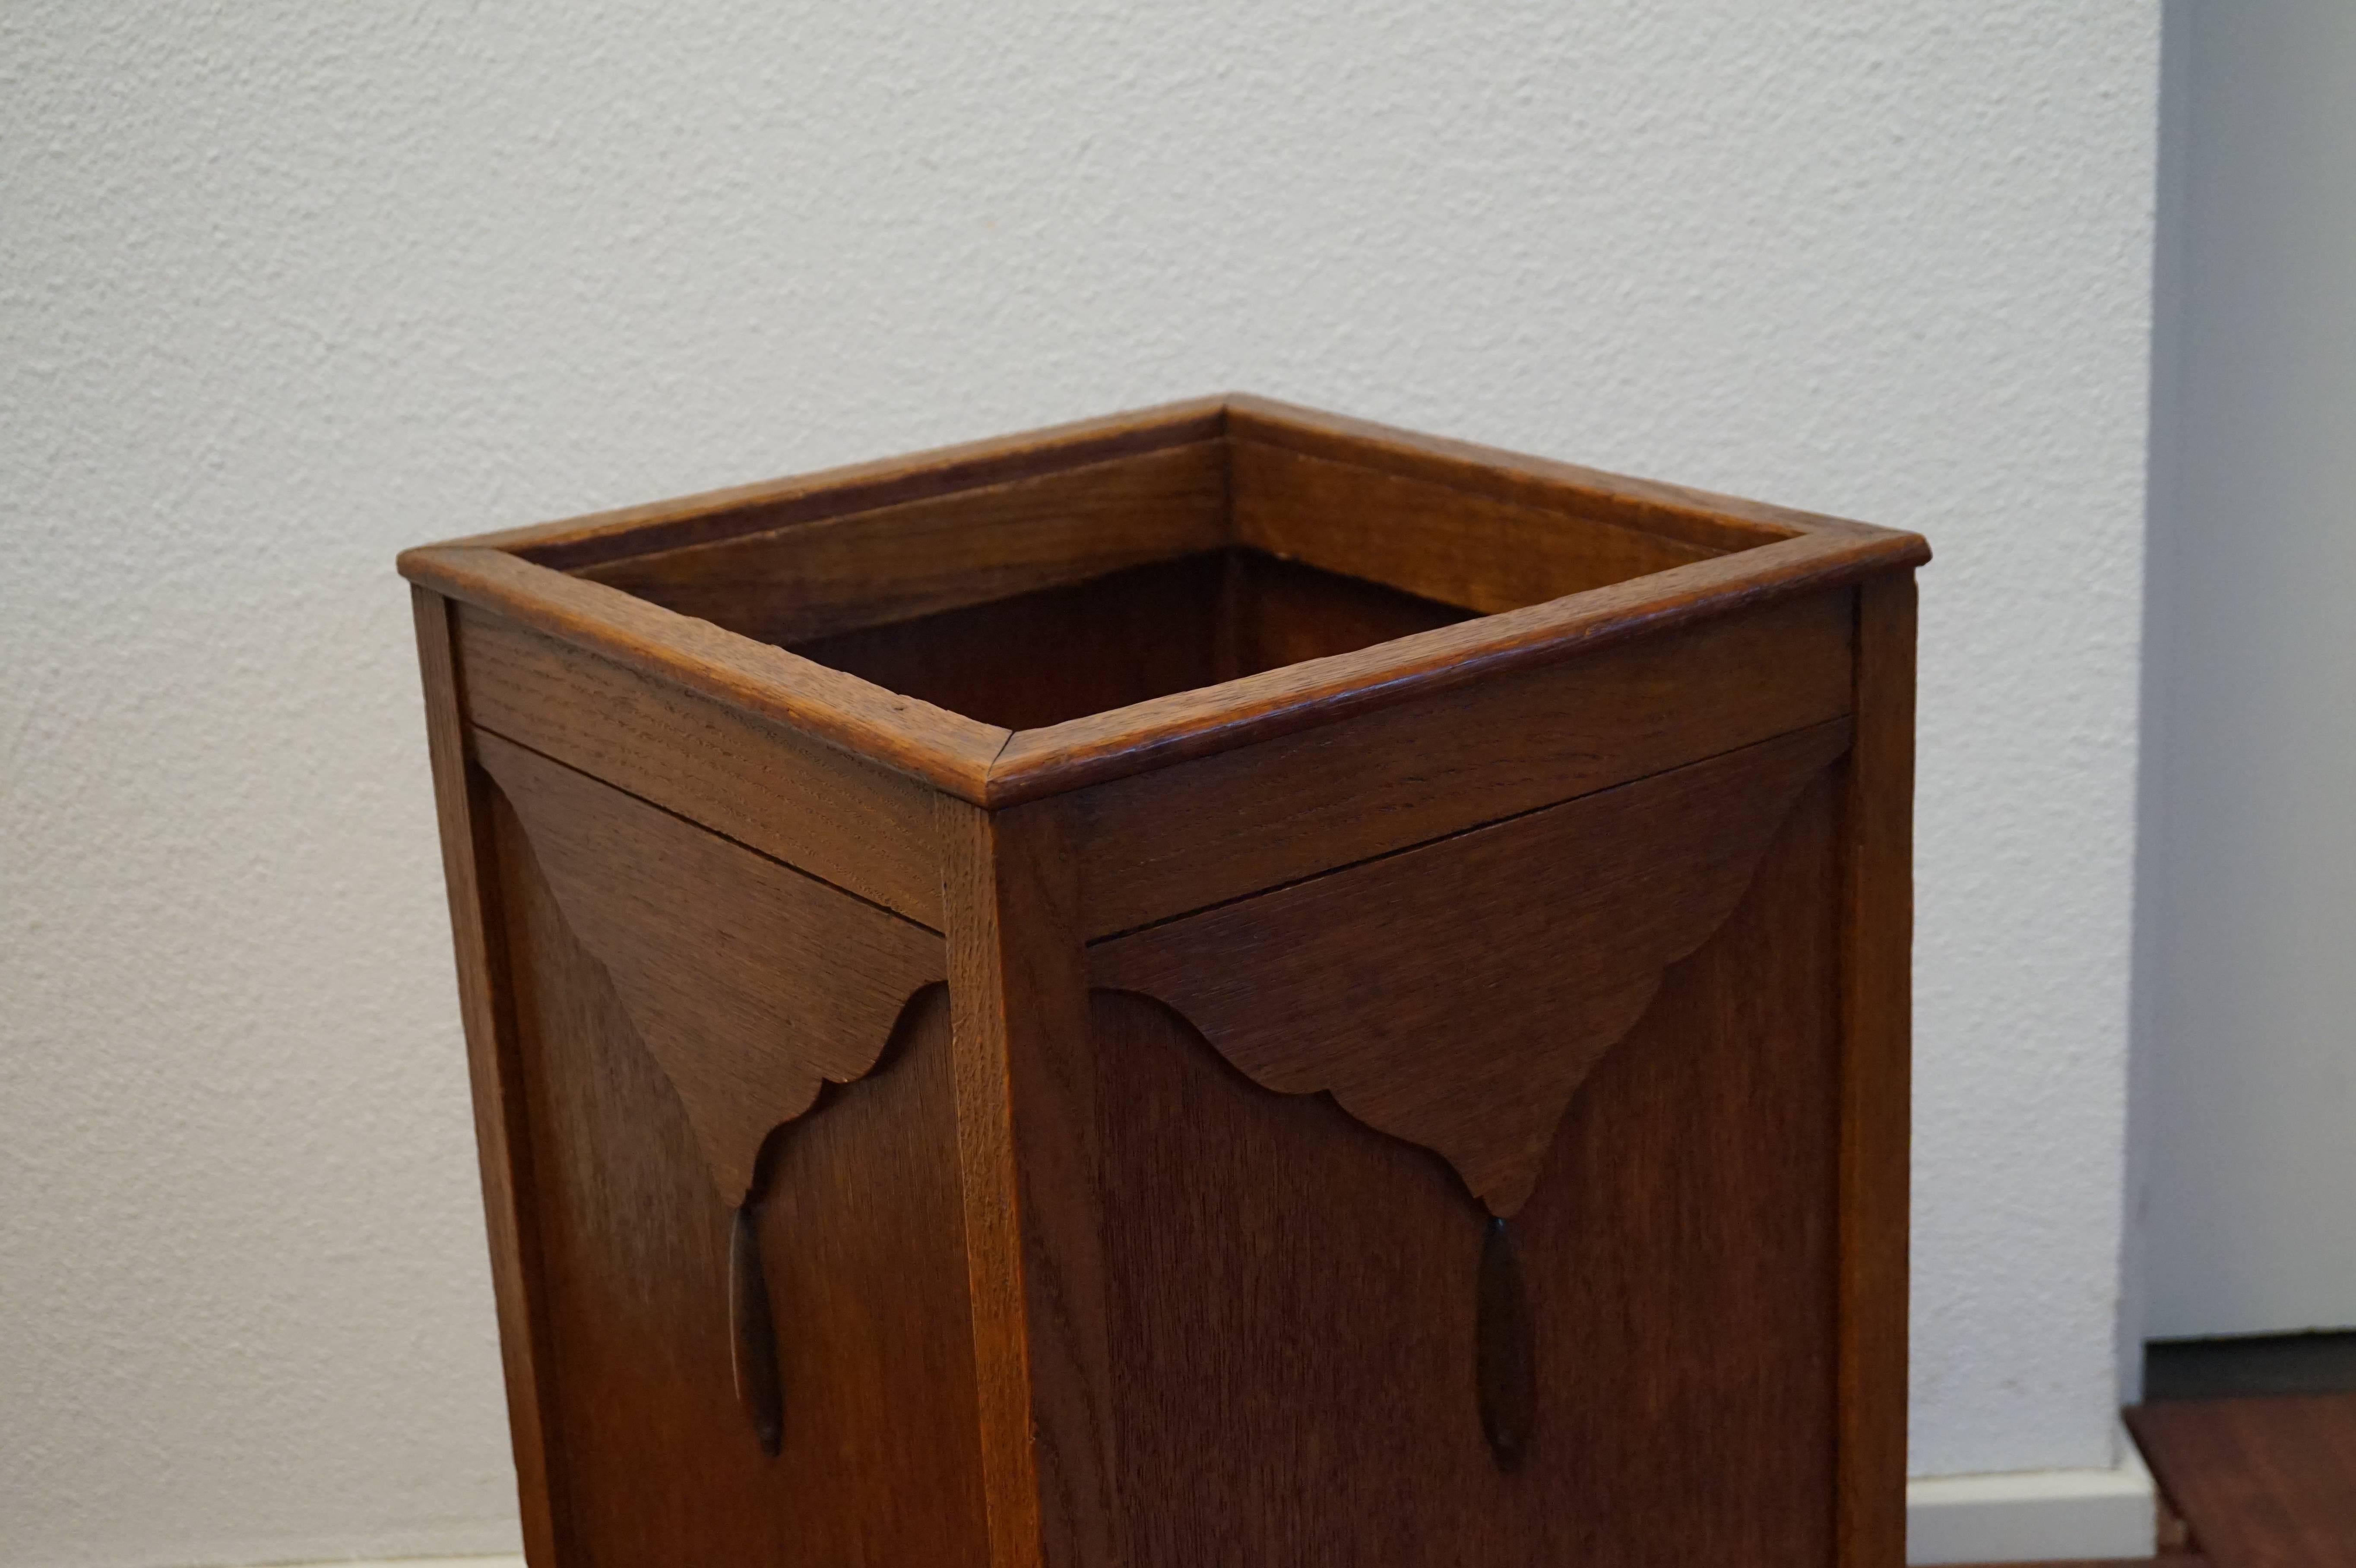 Hand-Crafted 1920s Oak Art Deco Umbrella Stand or Walking Cane Stand Geometrical Design